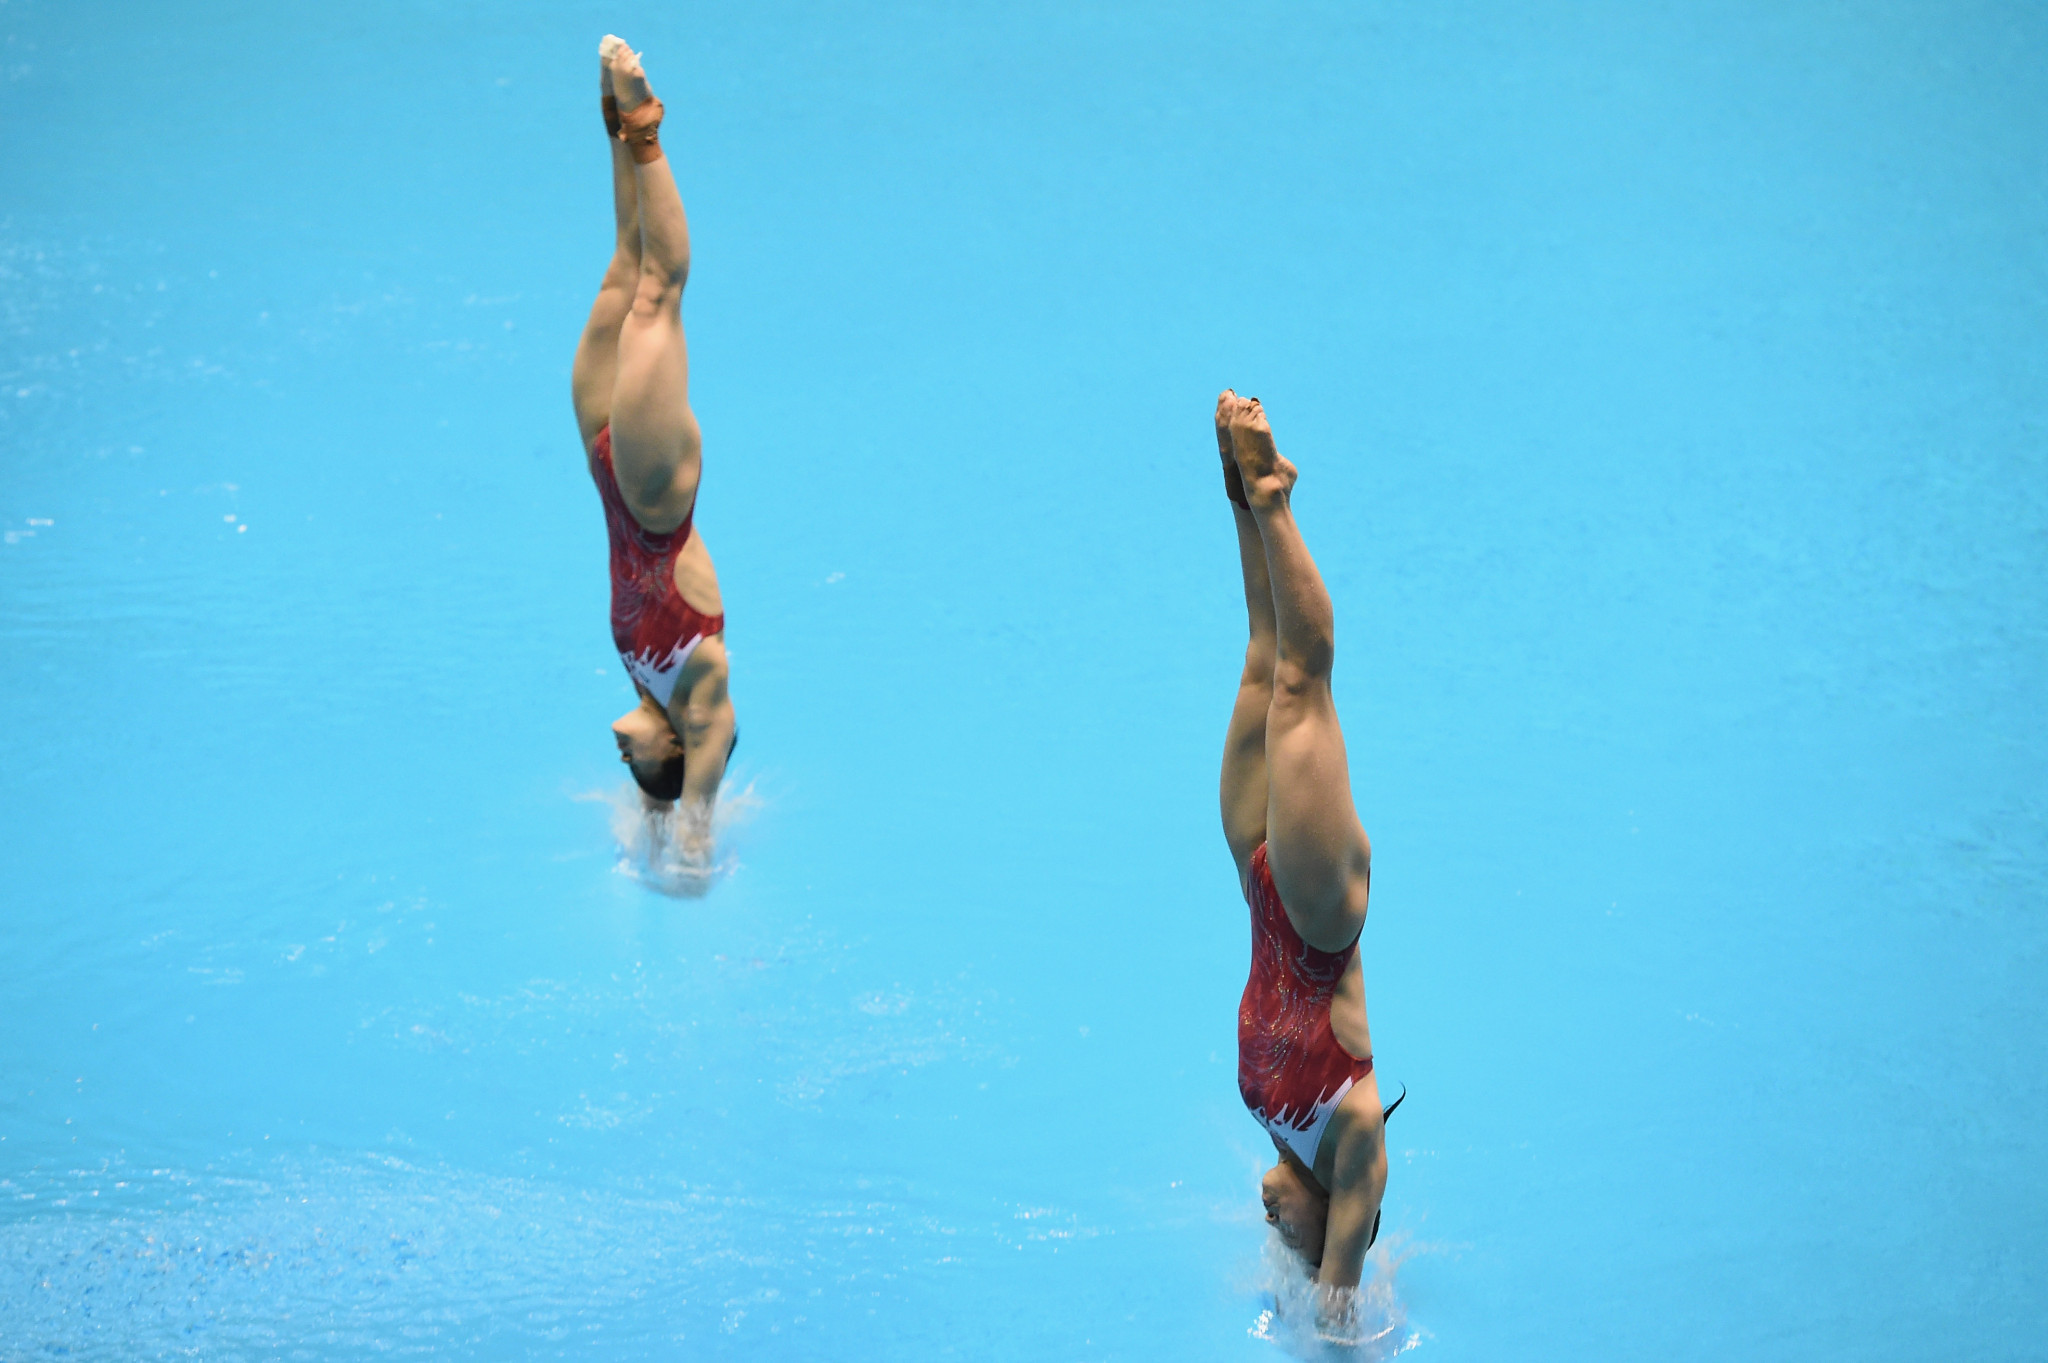 China's Shi Tingmao and Wang Han won the women's 3m synchronised event in Sagamihara ©Getty Images